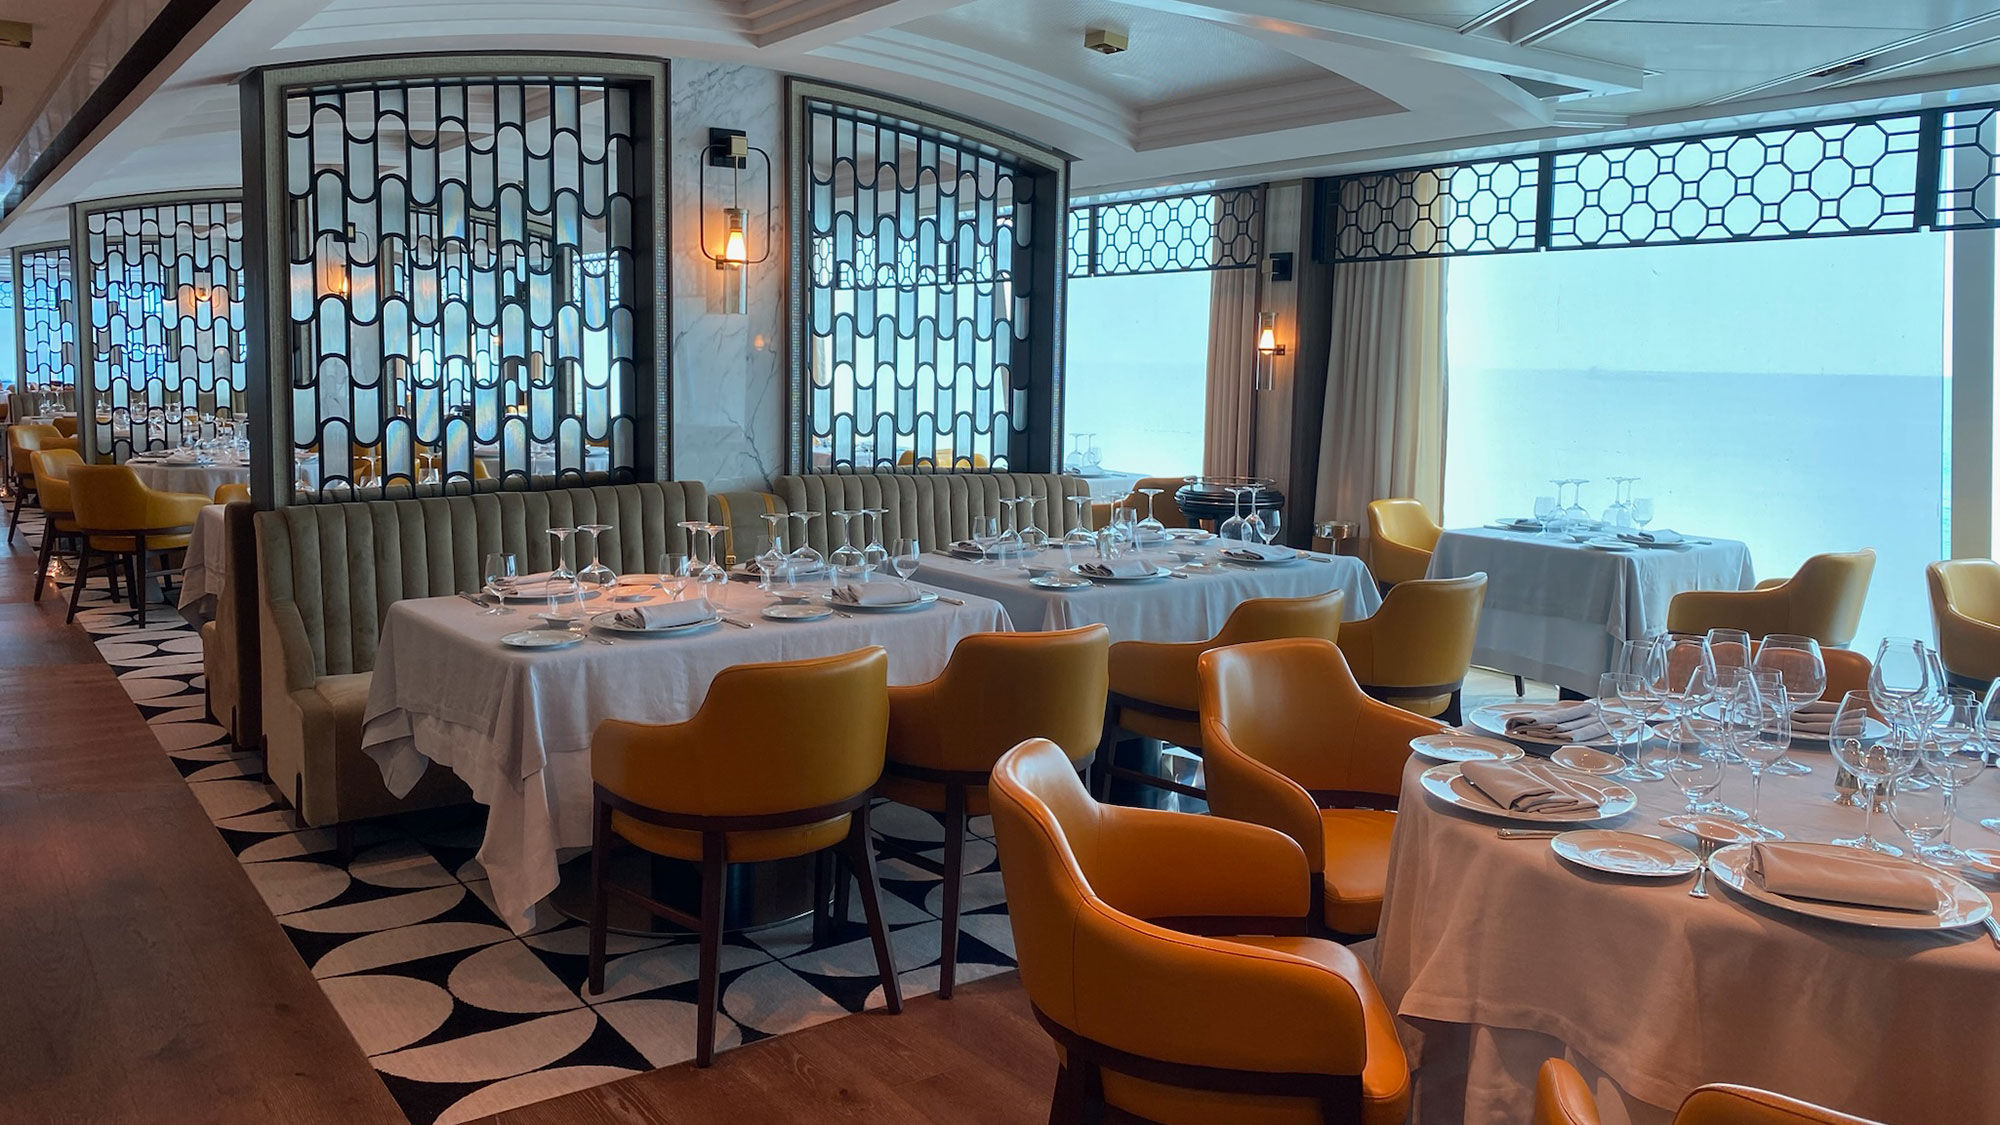 The Toscana restaurant on the Oceania Vista features a contemporary design, like curved shapes in space dividers and art made of small rectangular tiles.